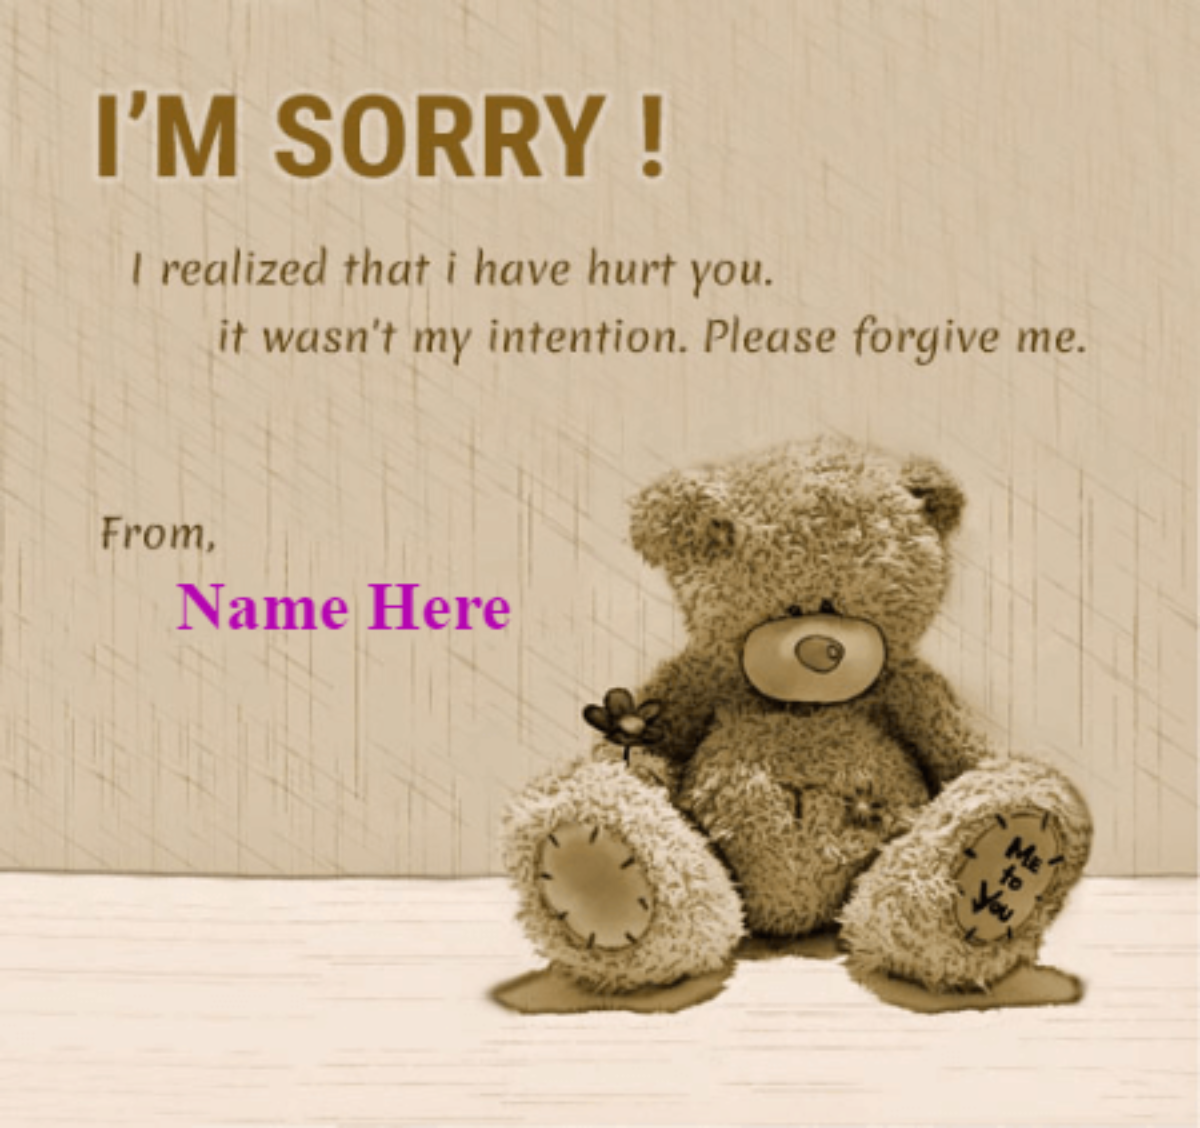 Really sorry for your